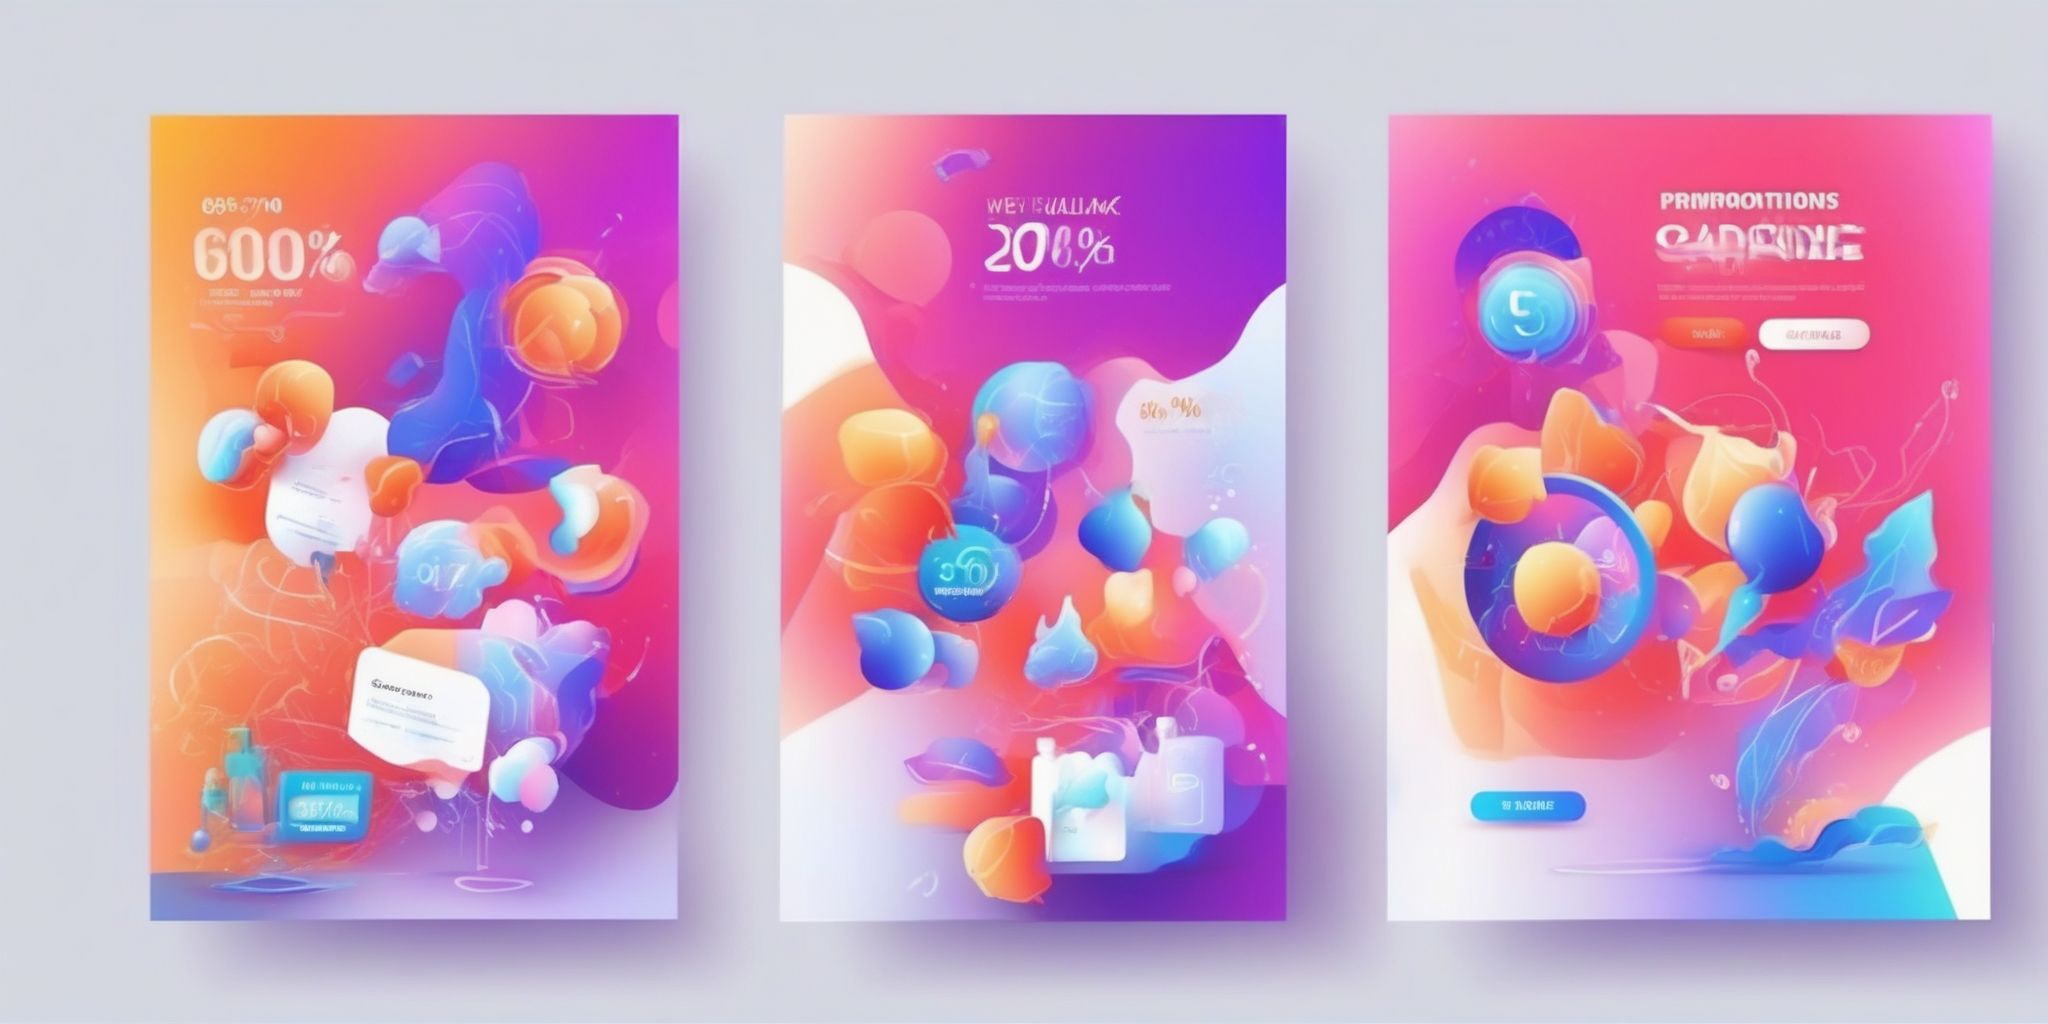 promotions in illustration style with gradients and white background